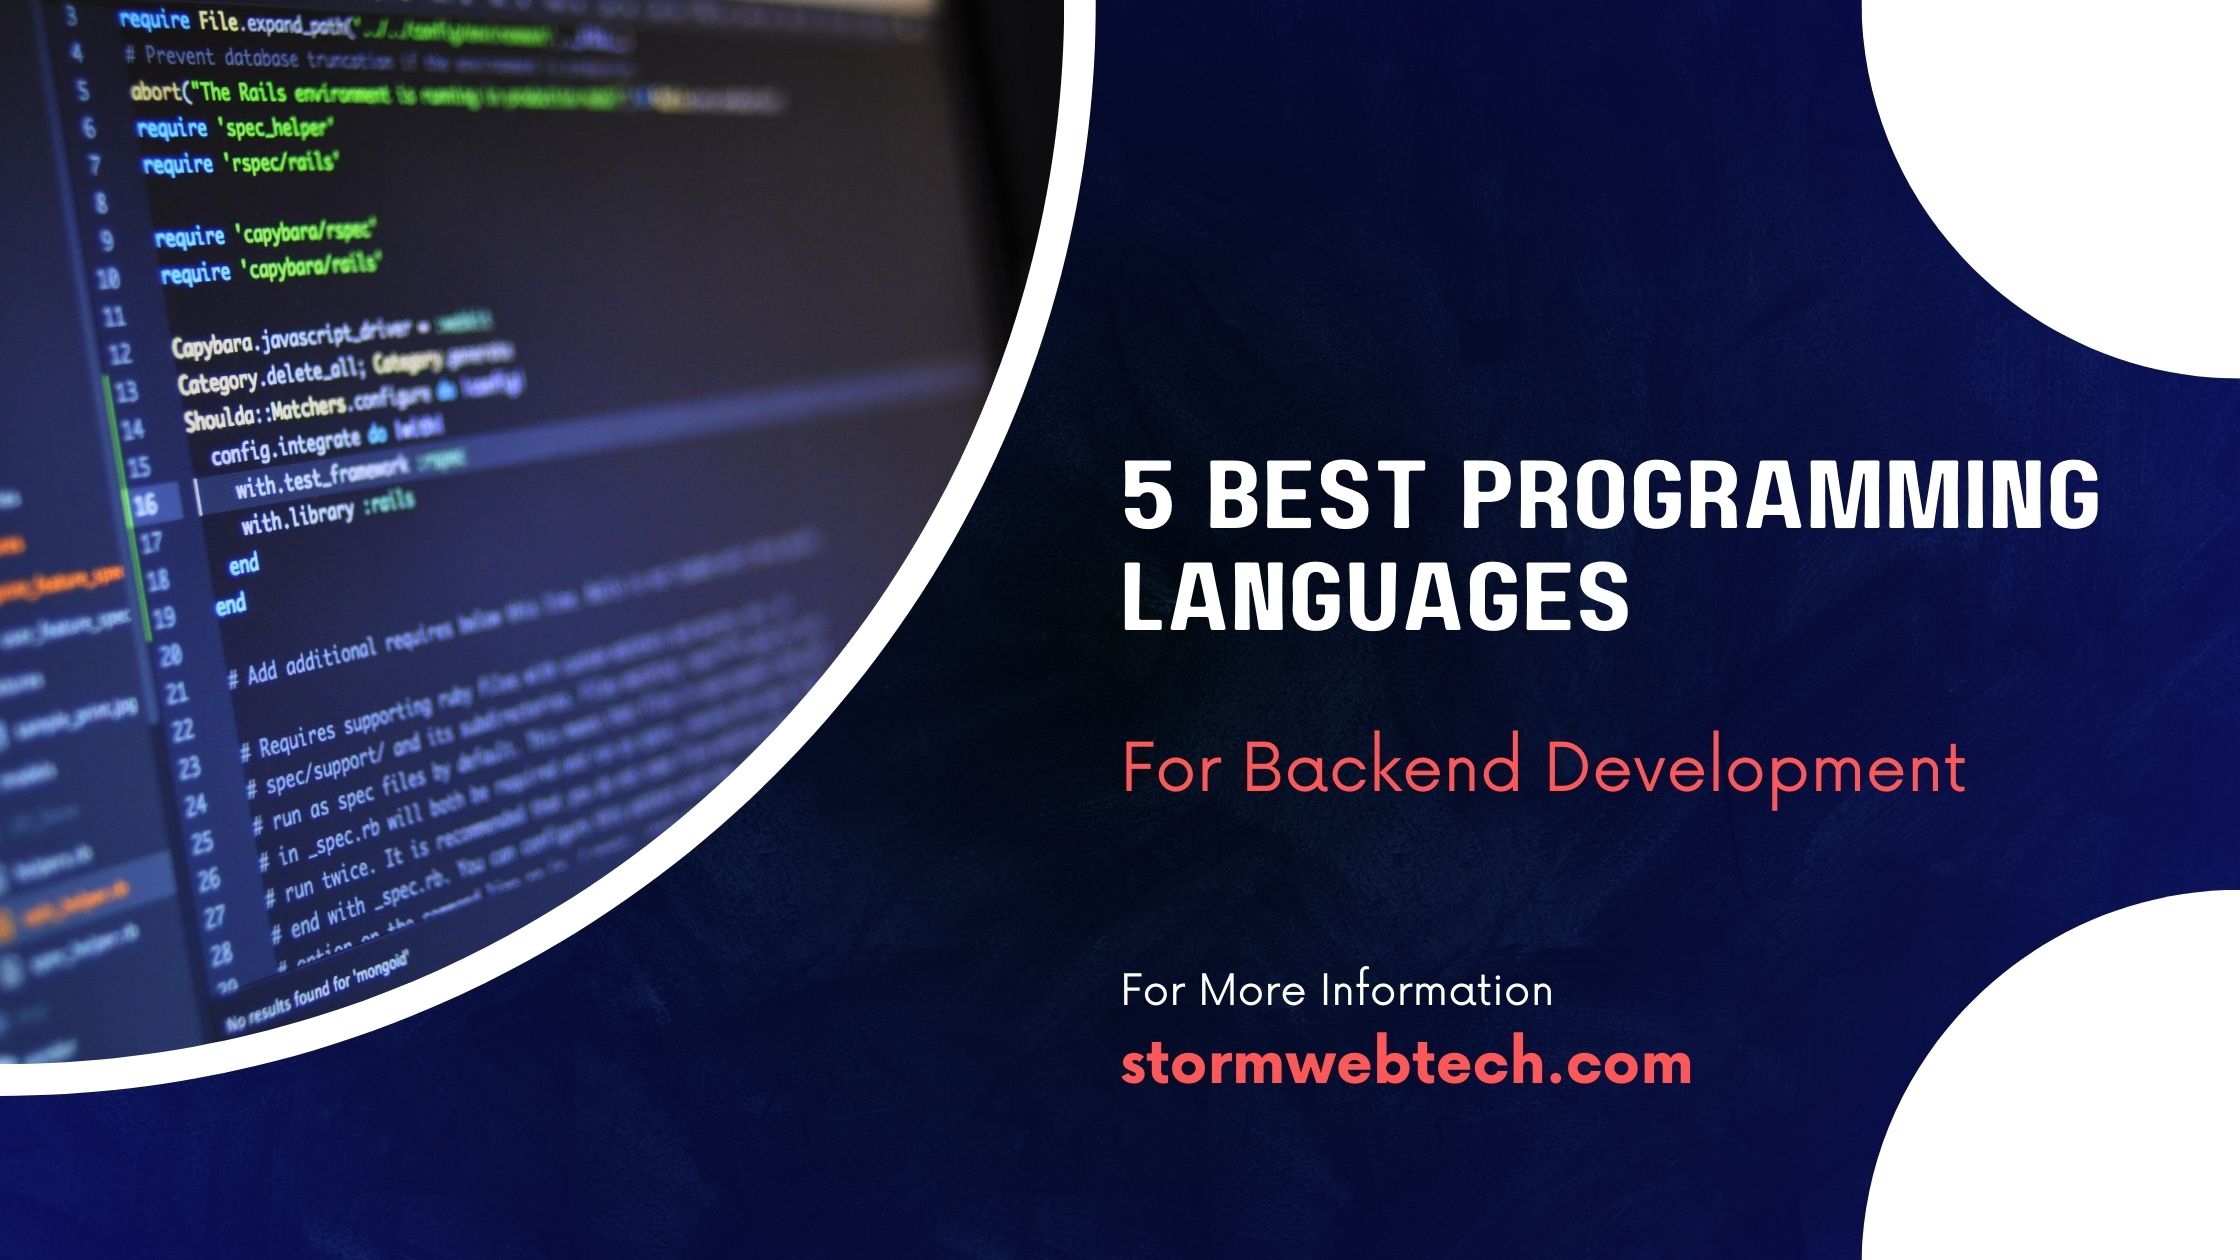 choosing the best programming languages for backend development is a critical decision that can impact the performance, scalability, maintainability